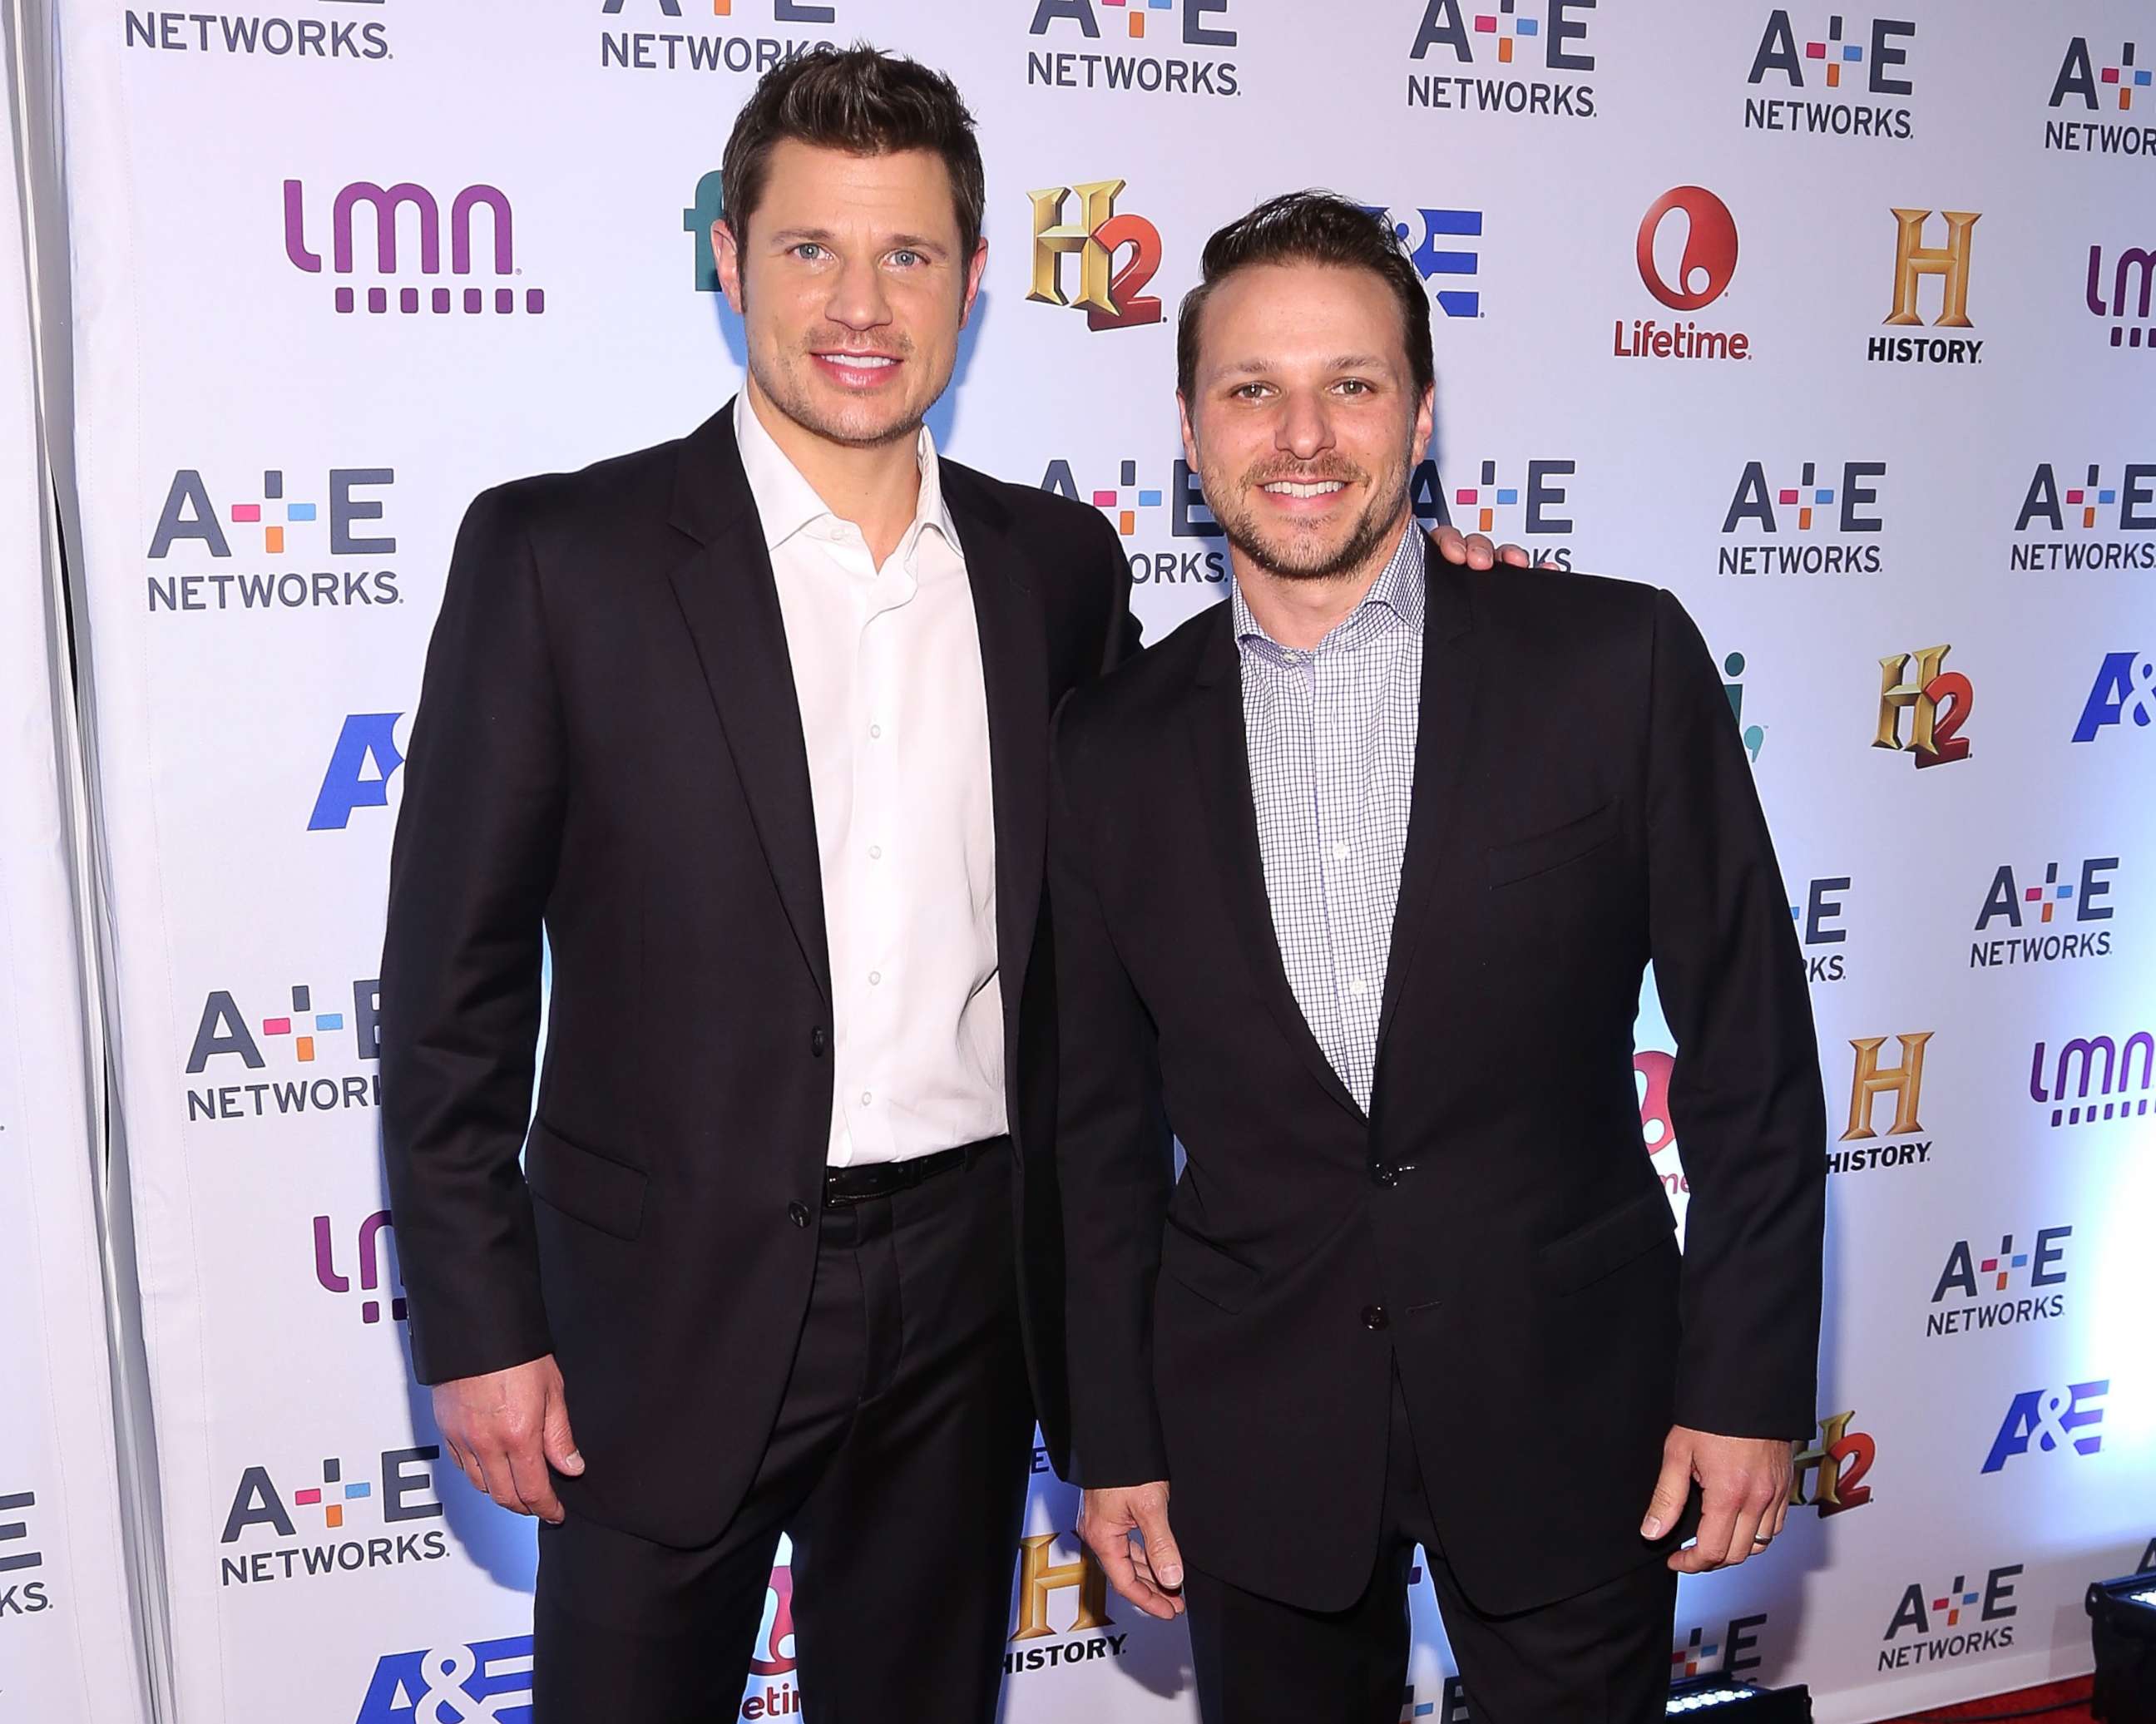 PHOTO: Nick Lachey and Drew Lachey attend the 2014 A+E Networks Upfronts on May 8, 2014 in New York City. 